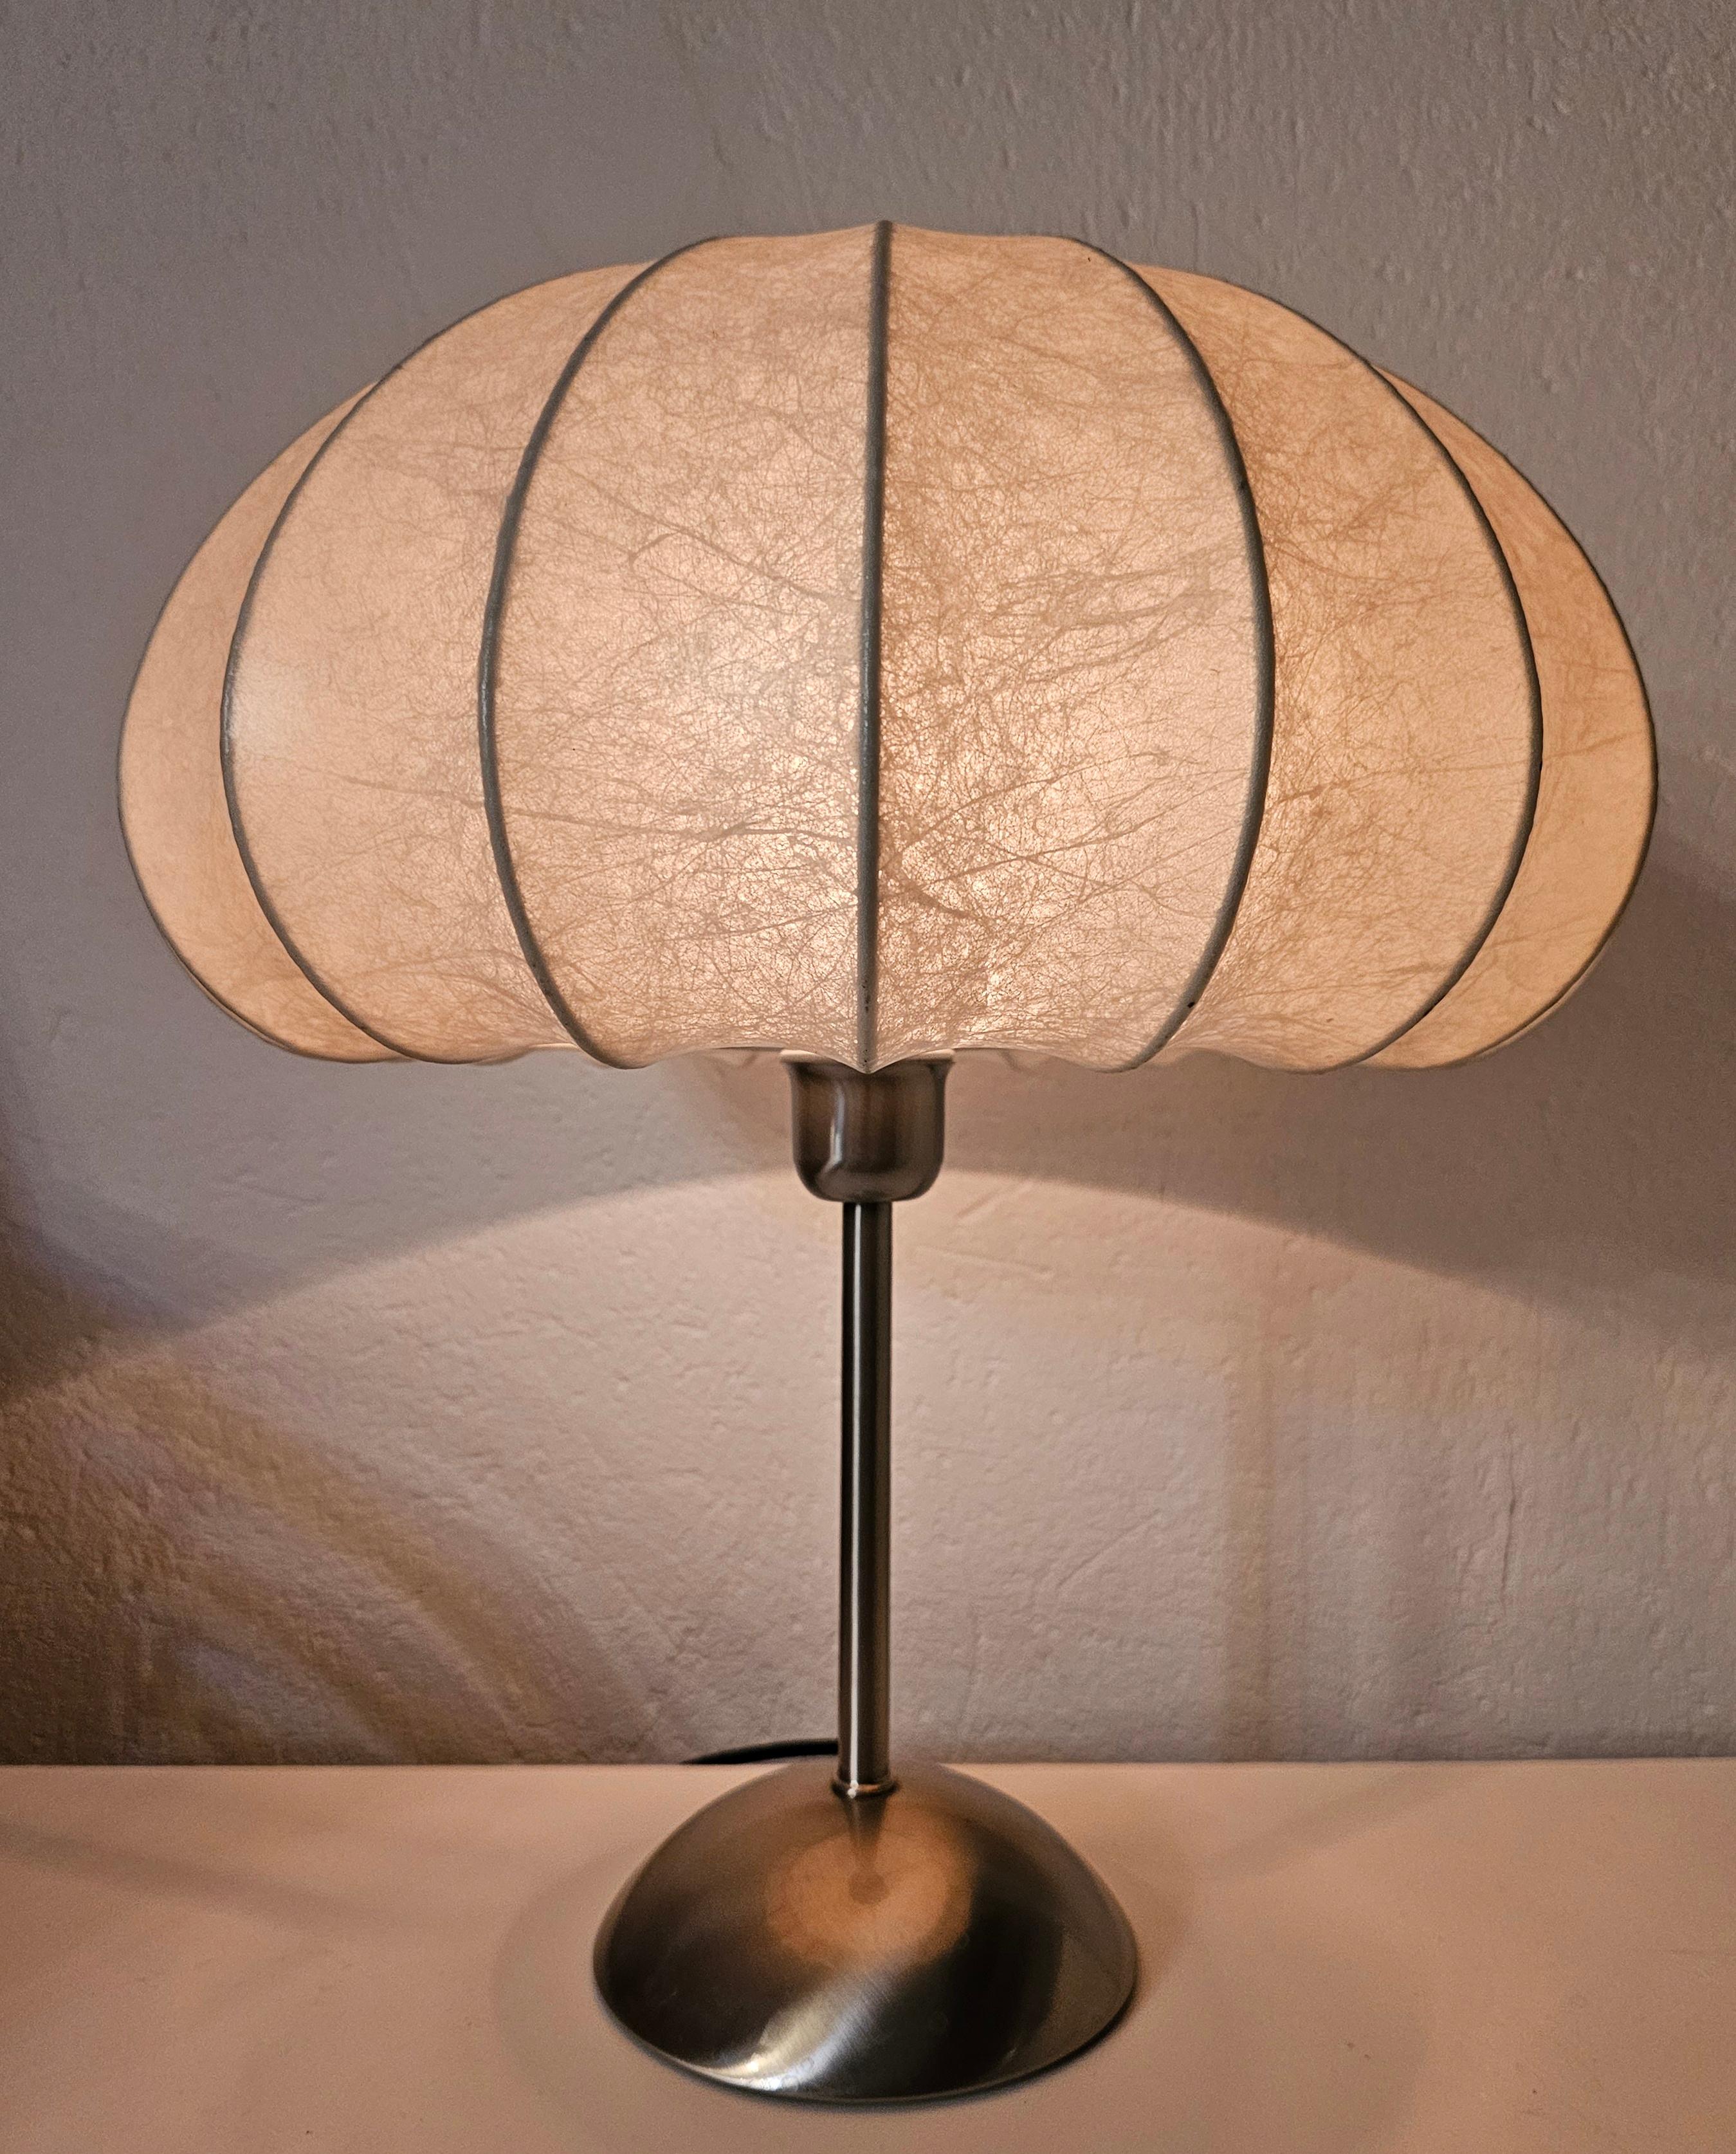 In this listing you will find a beautiful Mid Century Modern Table lamp done in style of Achille Castiglioni. It features a Cocoon shade and the chrome base with touch sensor, allowing you for 3 levels of light intensity. Made in Italy in